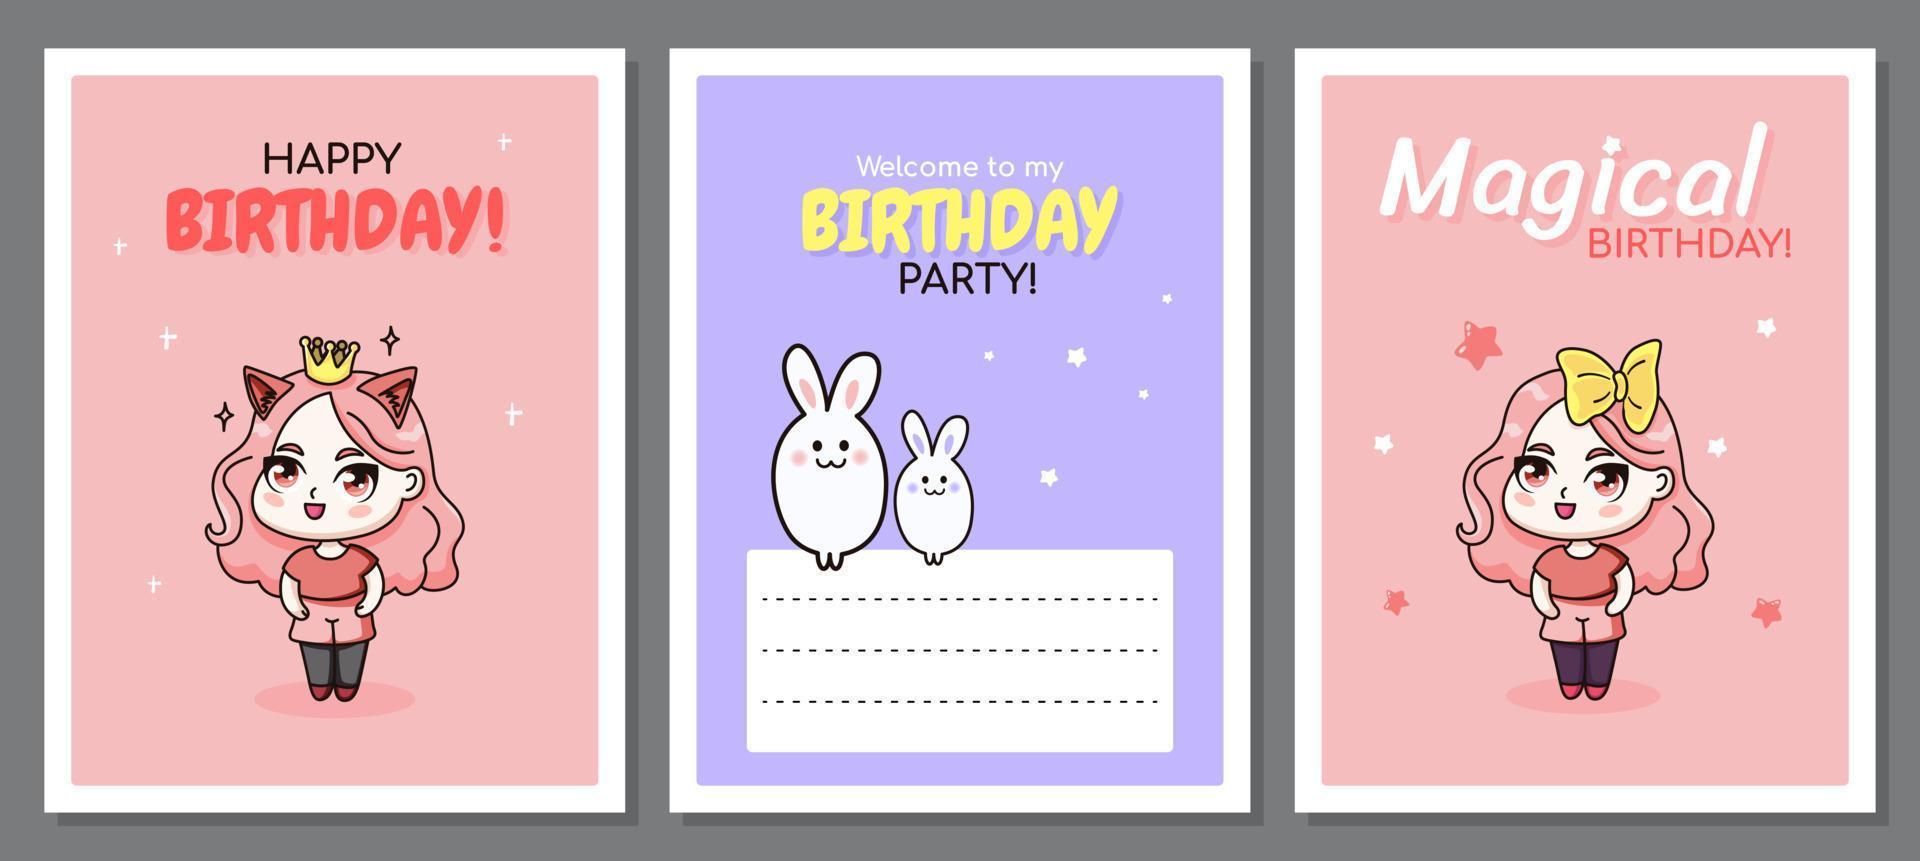 Set of happy birthday greeting cards with chibi girls and bunnies. Greeting cards in manga style for kids. Vector illustration